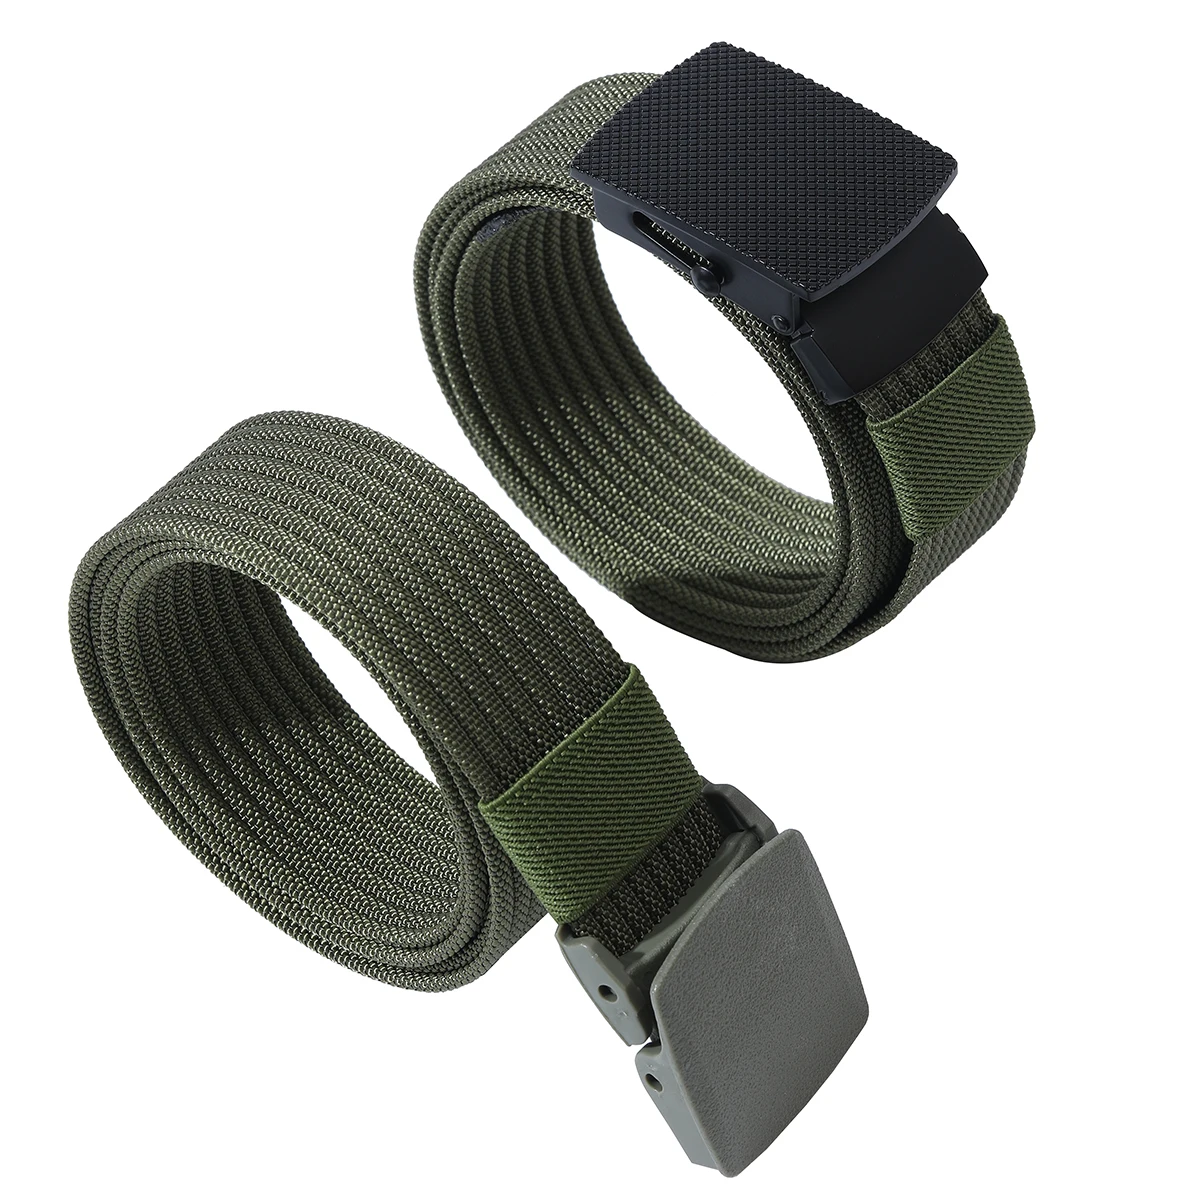 New Canvas Men's Belt Fashion Black Nylon Outdoor Metal Automatic Buckle Casual All-match Luxury Belt Male Wholesale